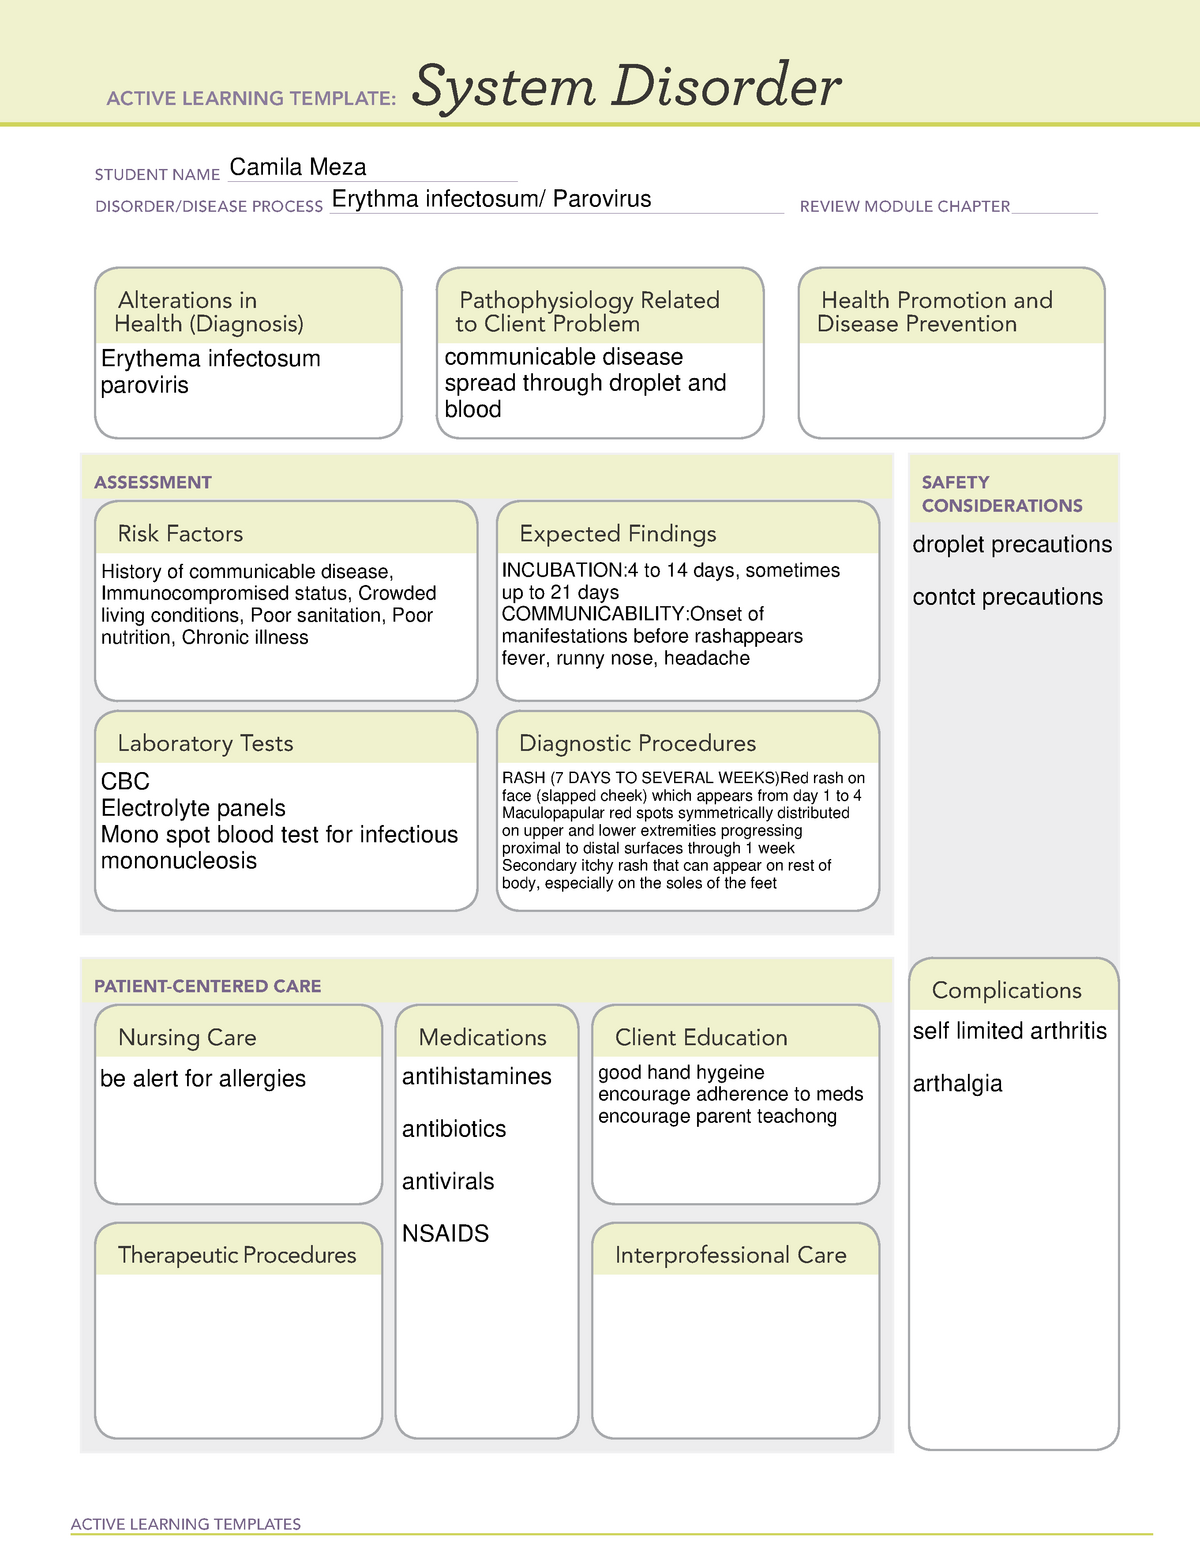 Remediation 15 Erythema infectosum ACTIVE LEARNING TEMPLATES System